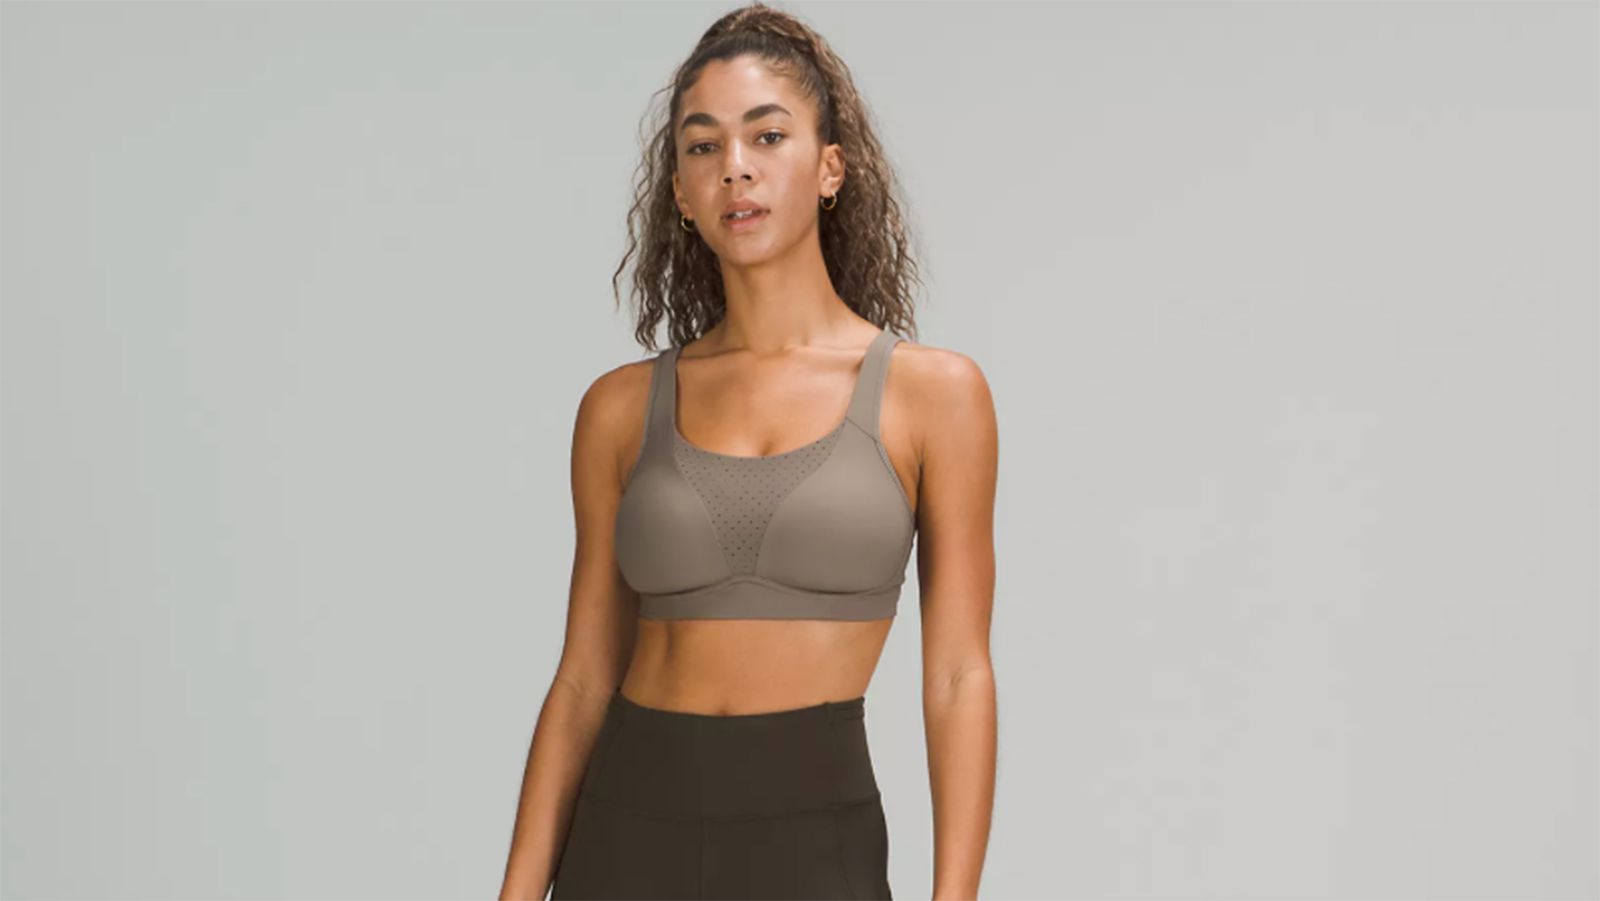 Women's Sport Bras for every Training and Race